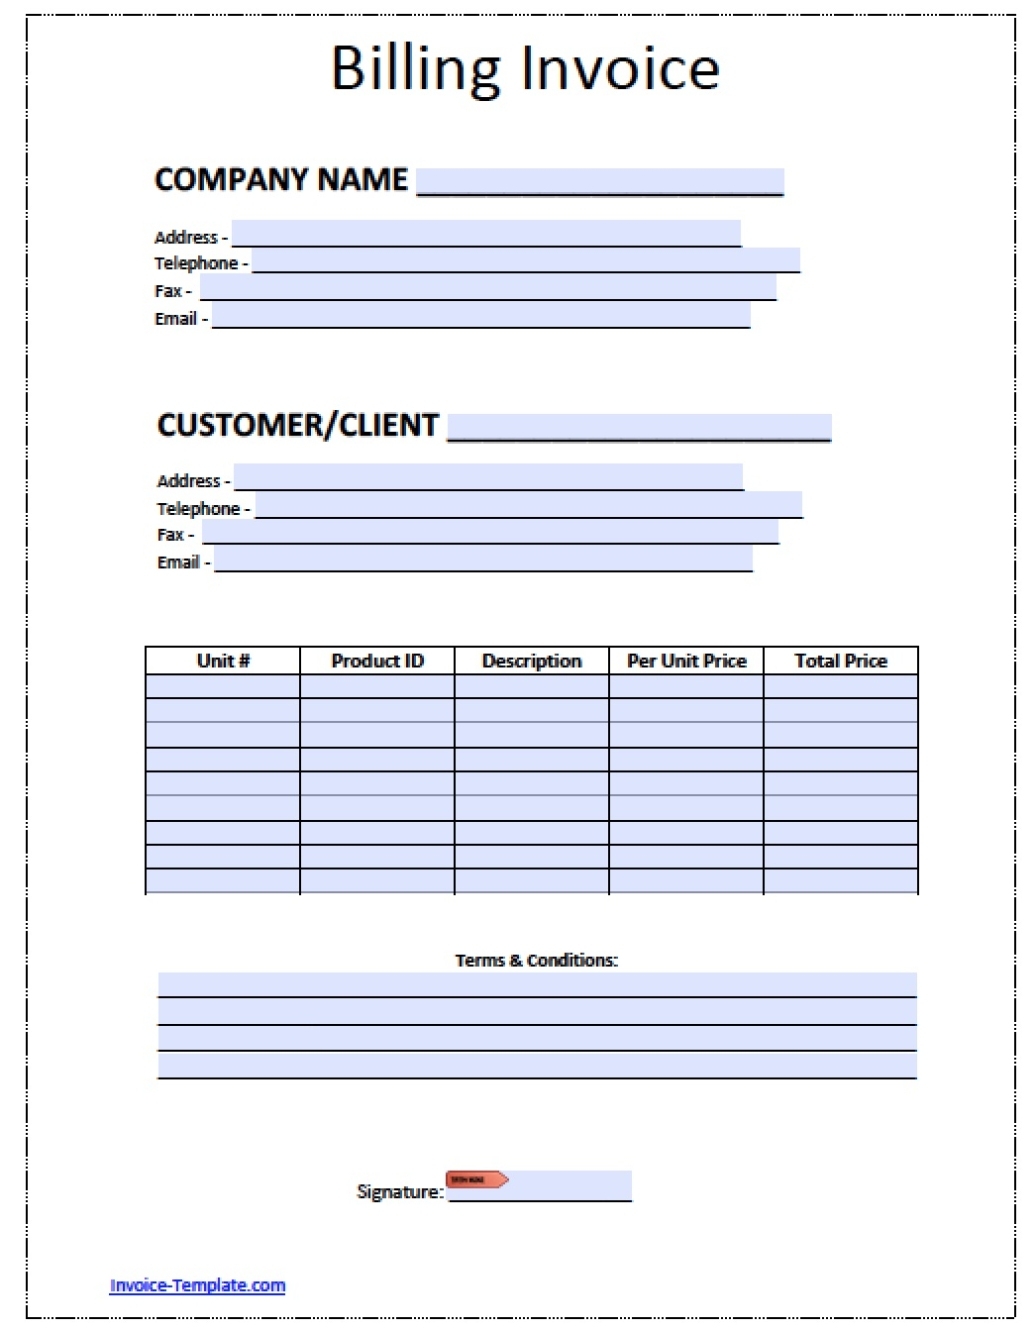 Billing Invoice Template « Download Free Blank Invoice Templates | Pdf Throughout Free Printable Invoice Template Microsoft Word